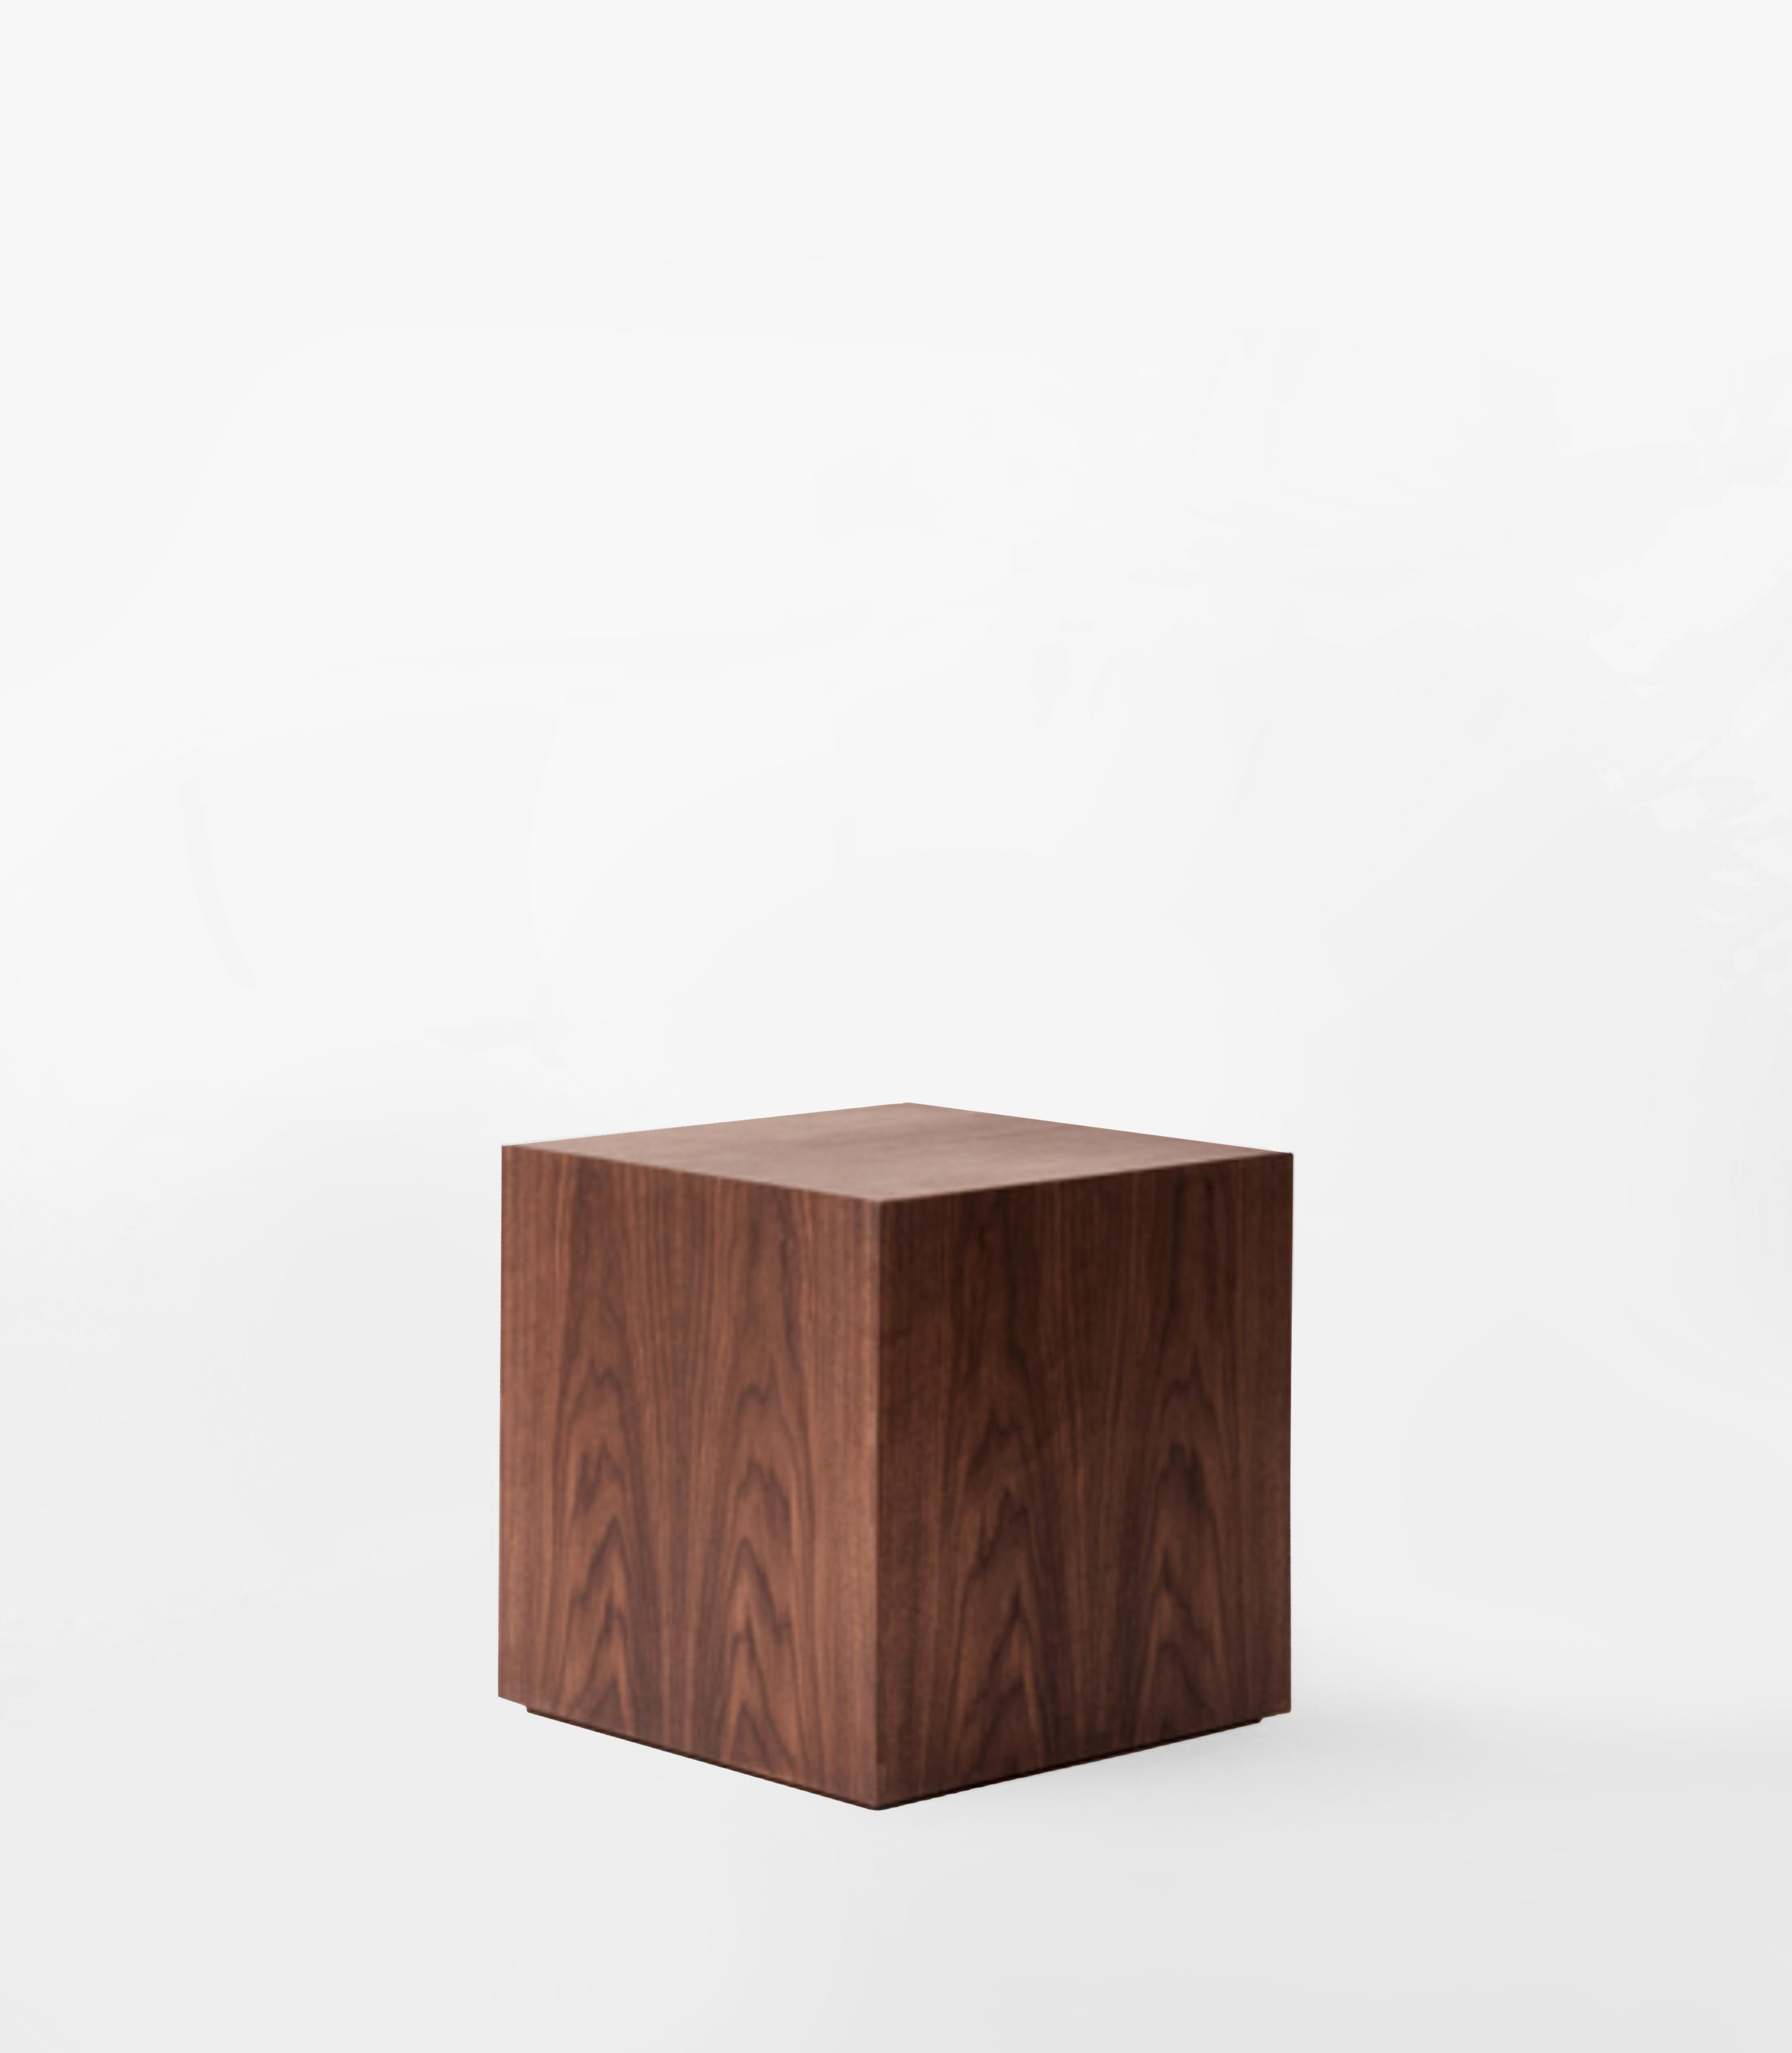 Equal parts beautiful and timeless, the Arran side table is a simple product, beautifully showcasing the timeless qualities of wood. Designed for use independently or combined with the various sizes available to create a sculptural installation of